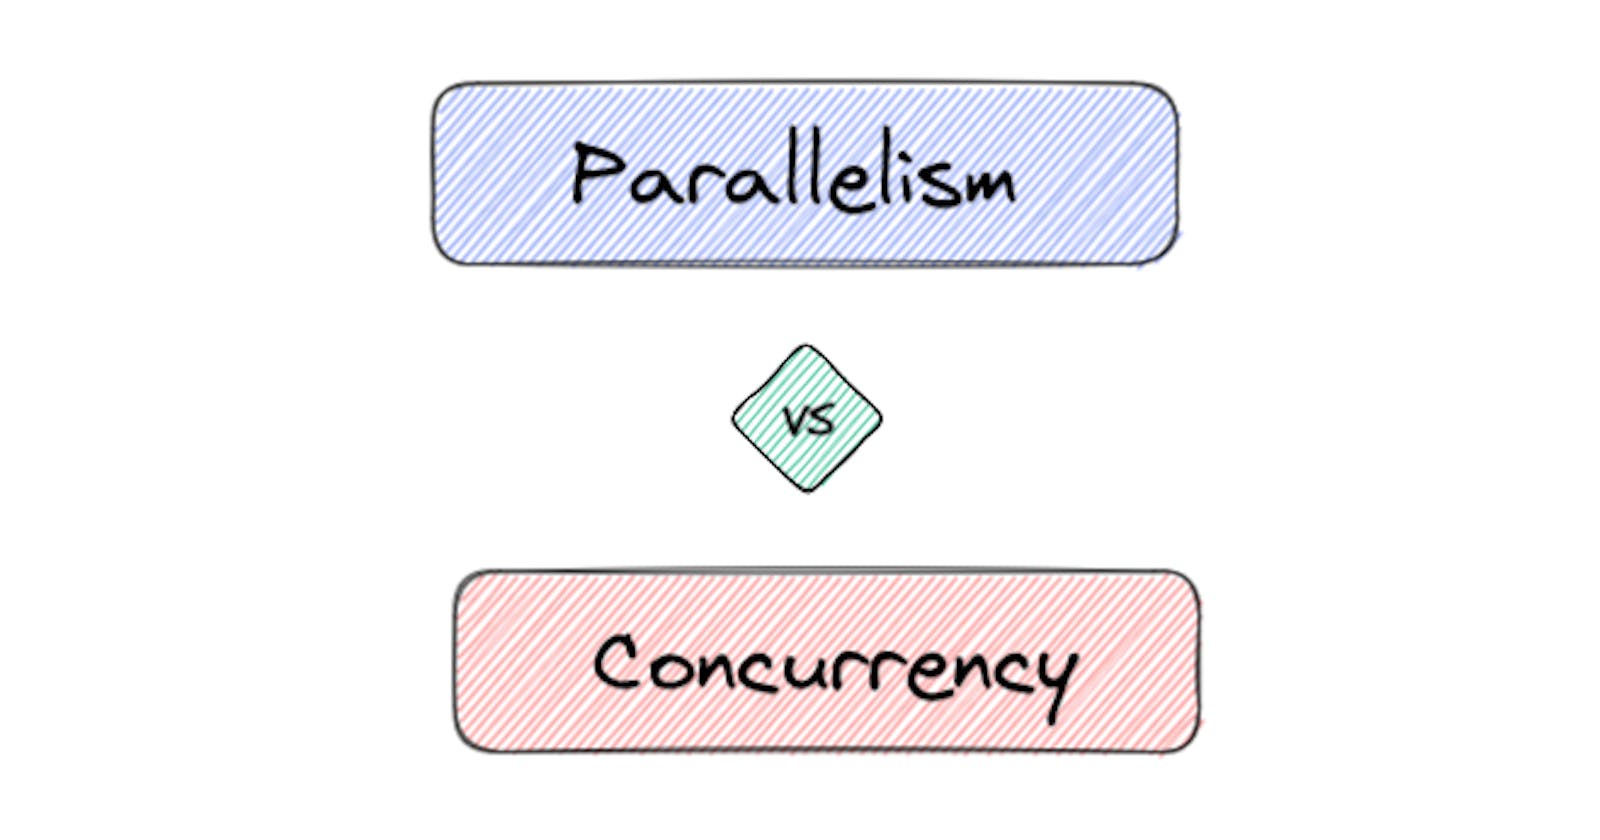 Concurrency is not what you think it is!